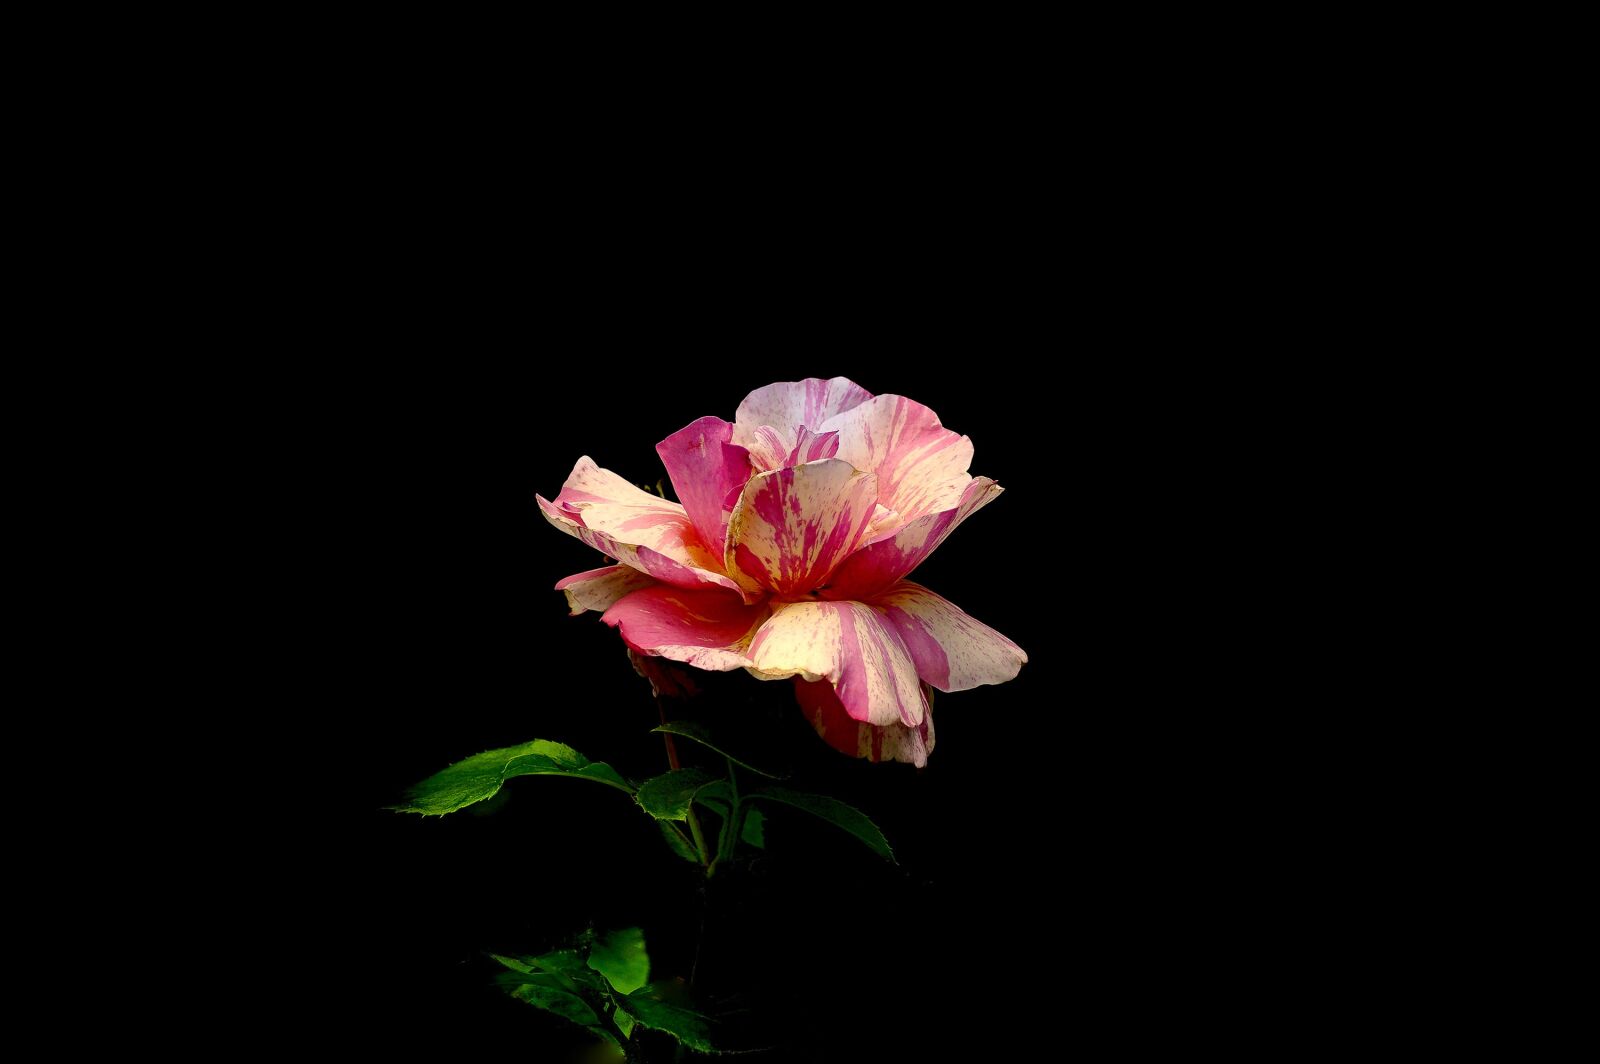 Sony a6000 sample photo. Valentine's day, rose, flower photography